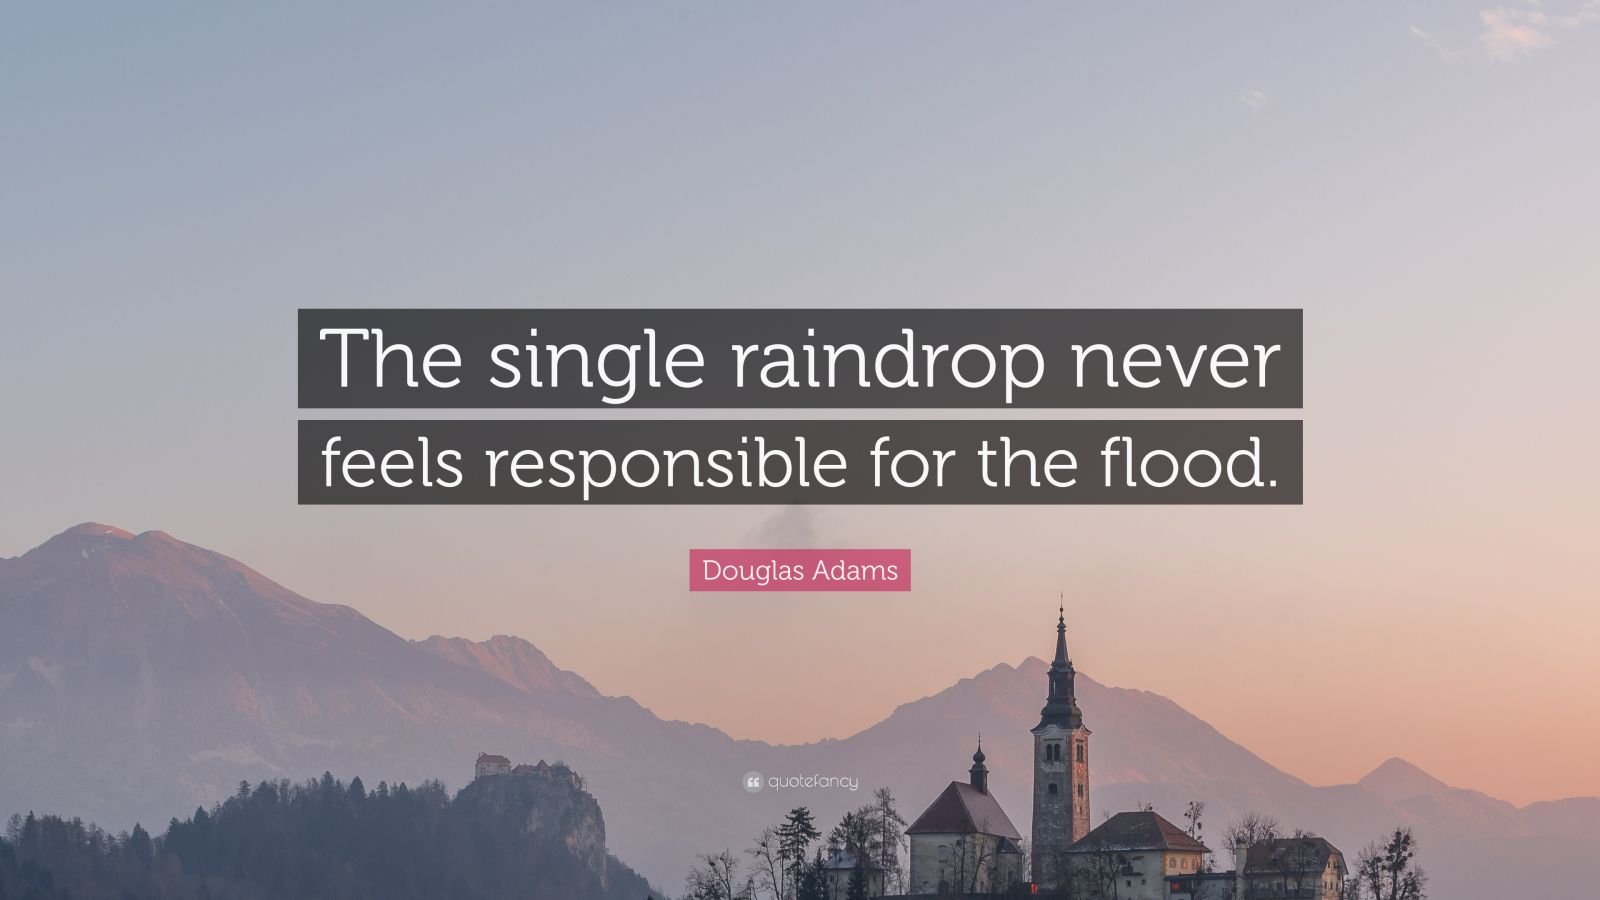 The single raindrop never feels responsible for the flood